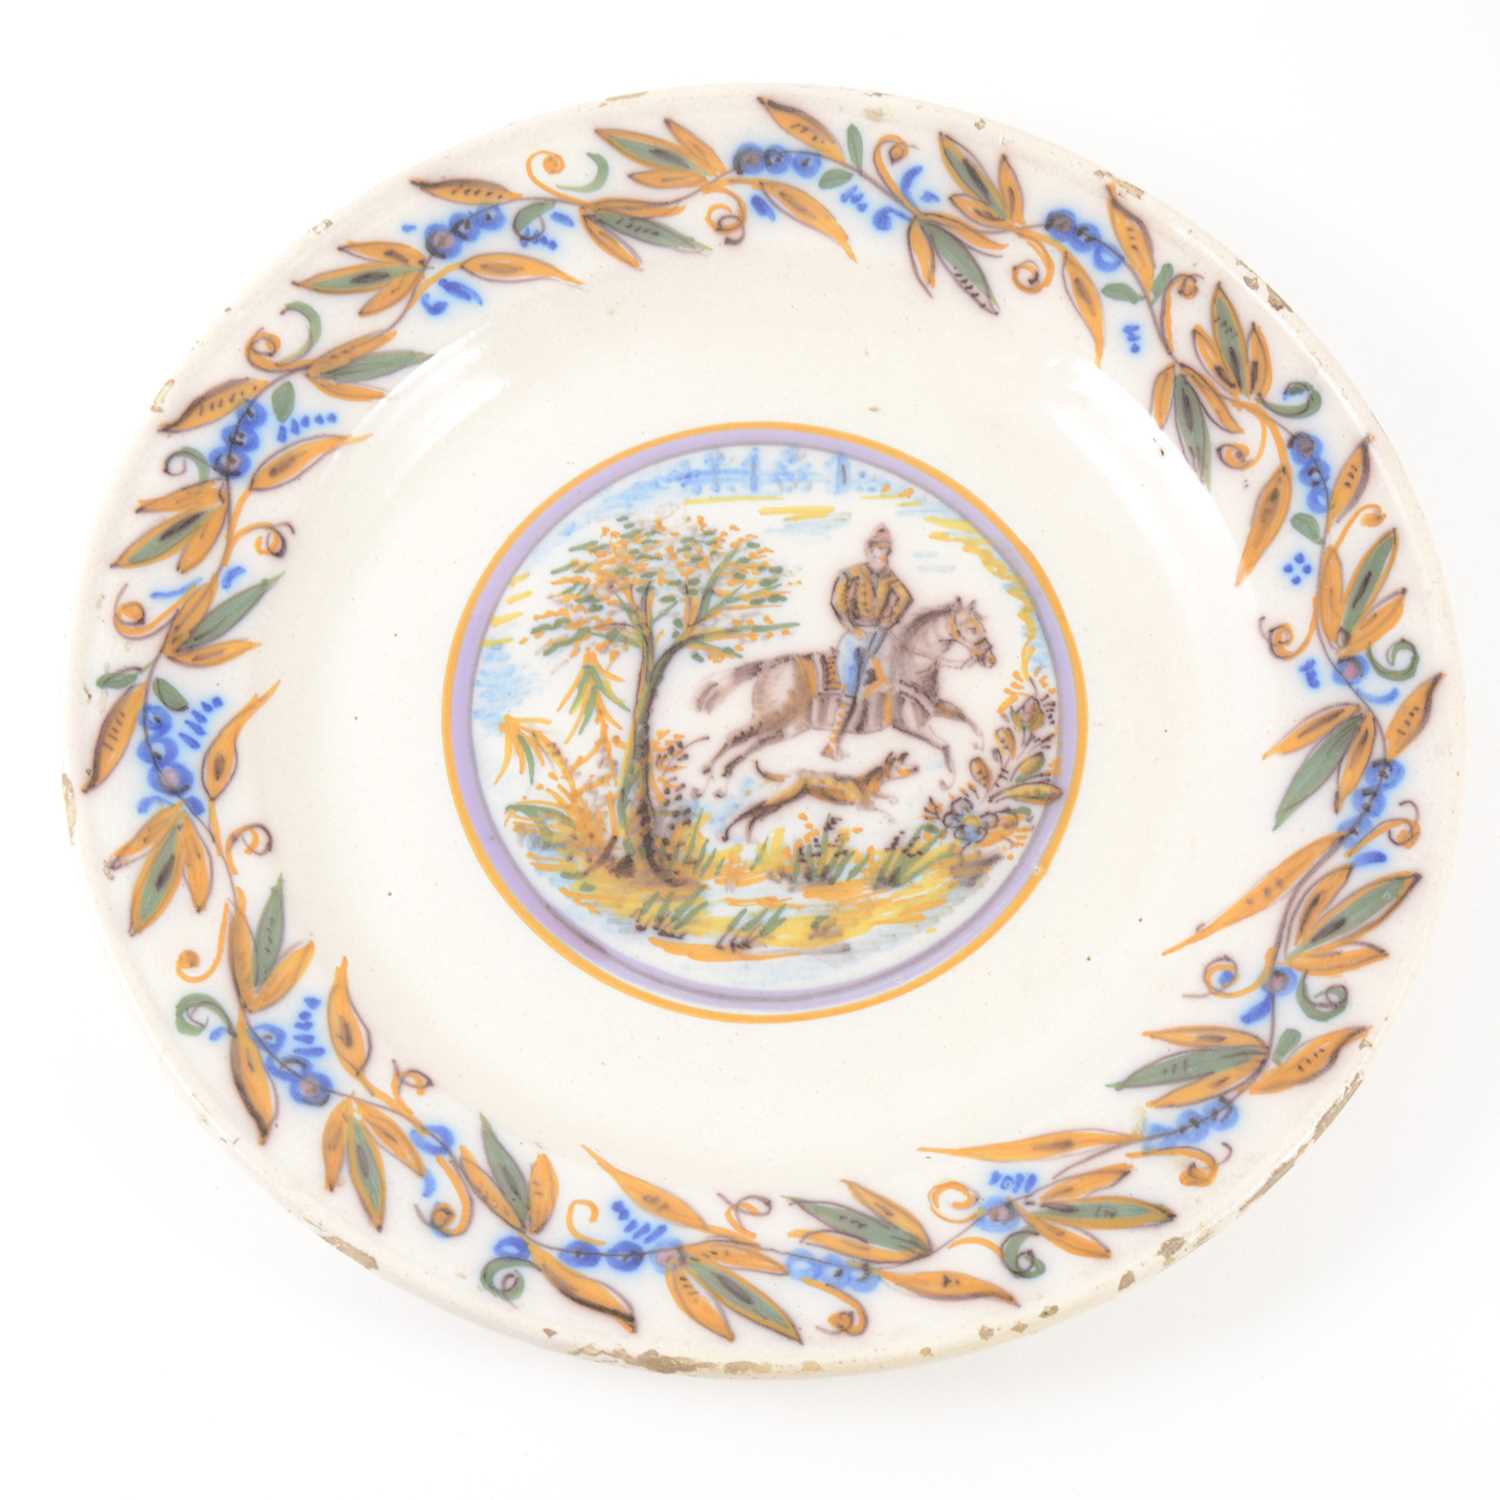 Lot 1056 - A French faience charger, 18th century